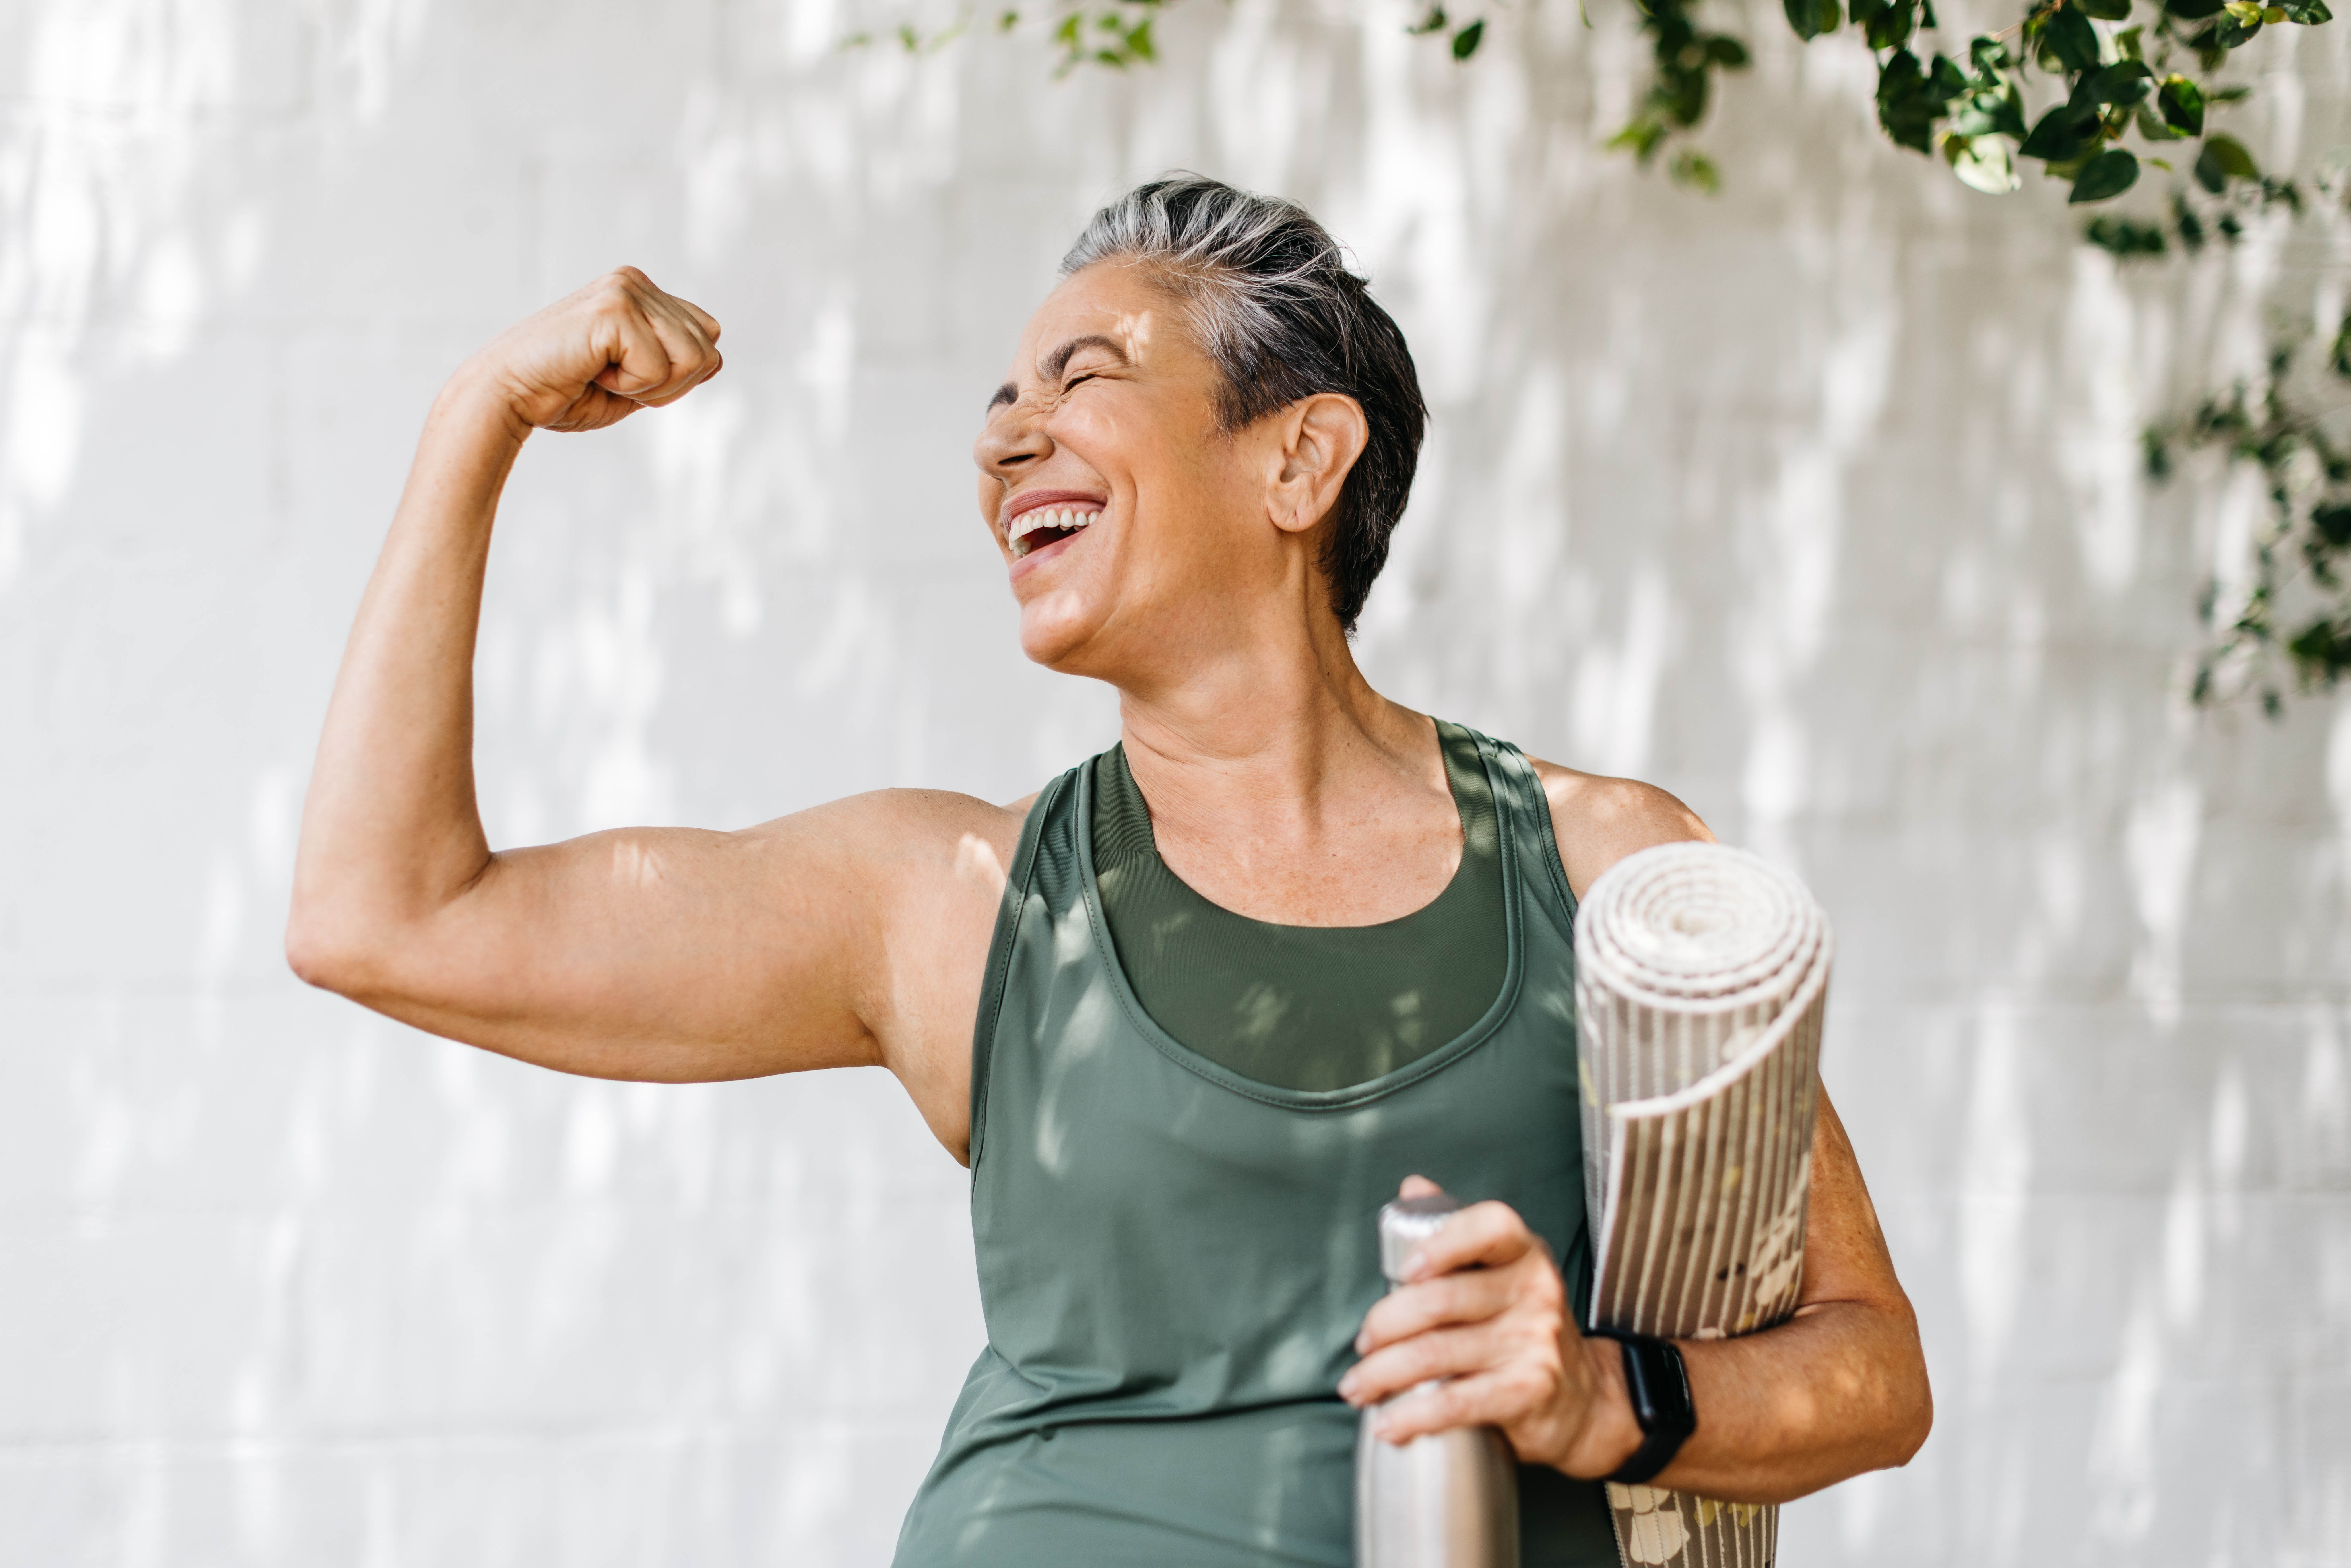 Older woman flexing her arm and smiling, she has a yoga mat under her other arm